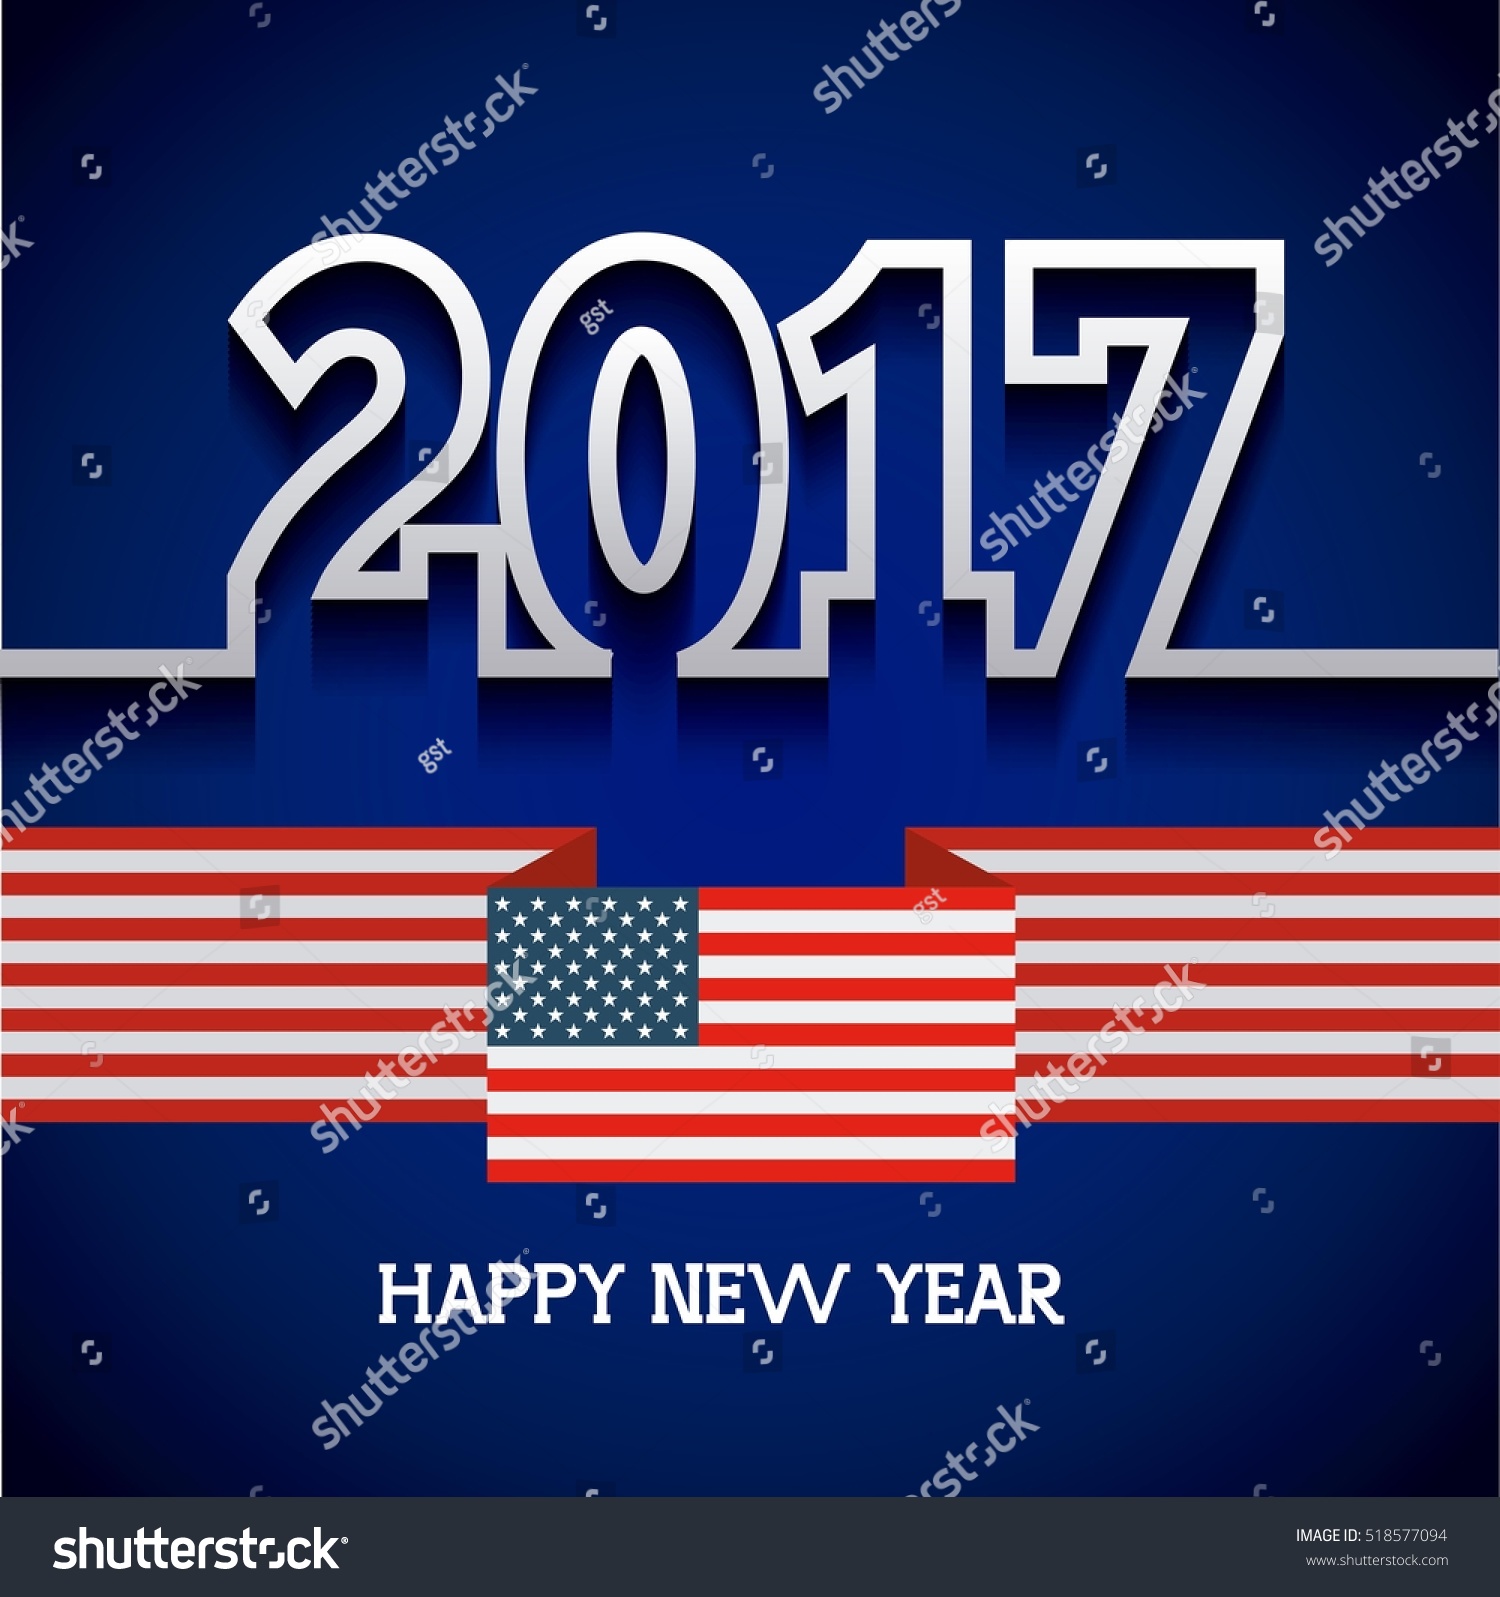 Happy New Year Card Usa Concept Stock Vector 518577094 - Shutterstock